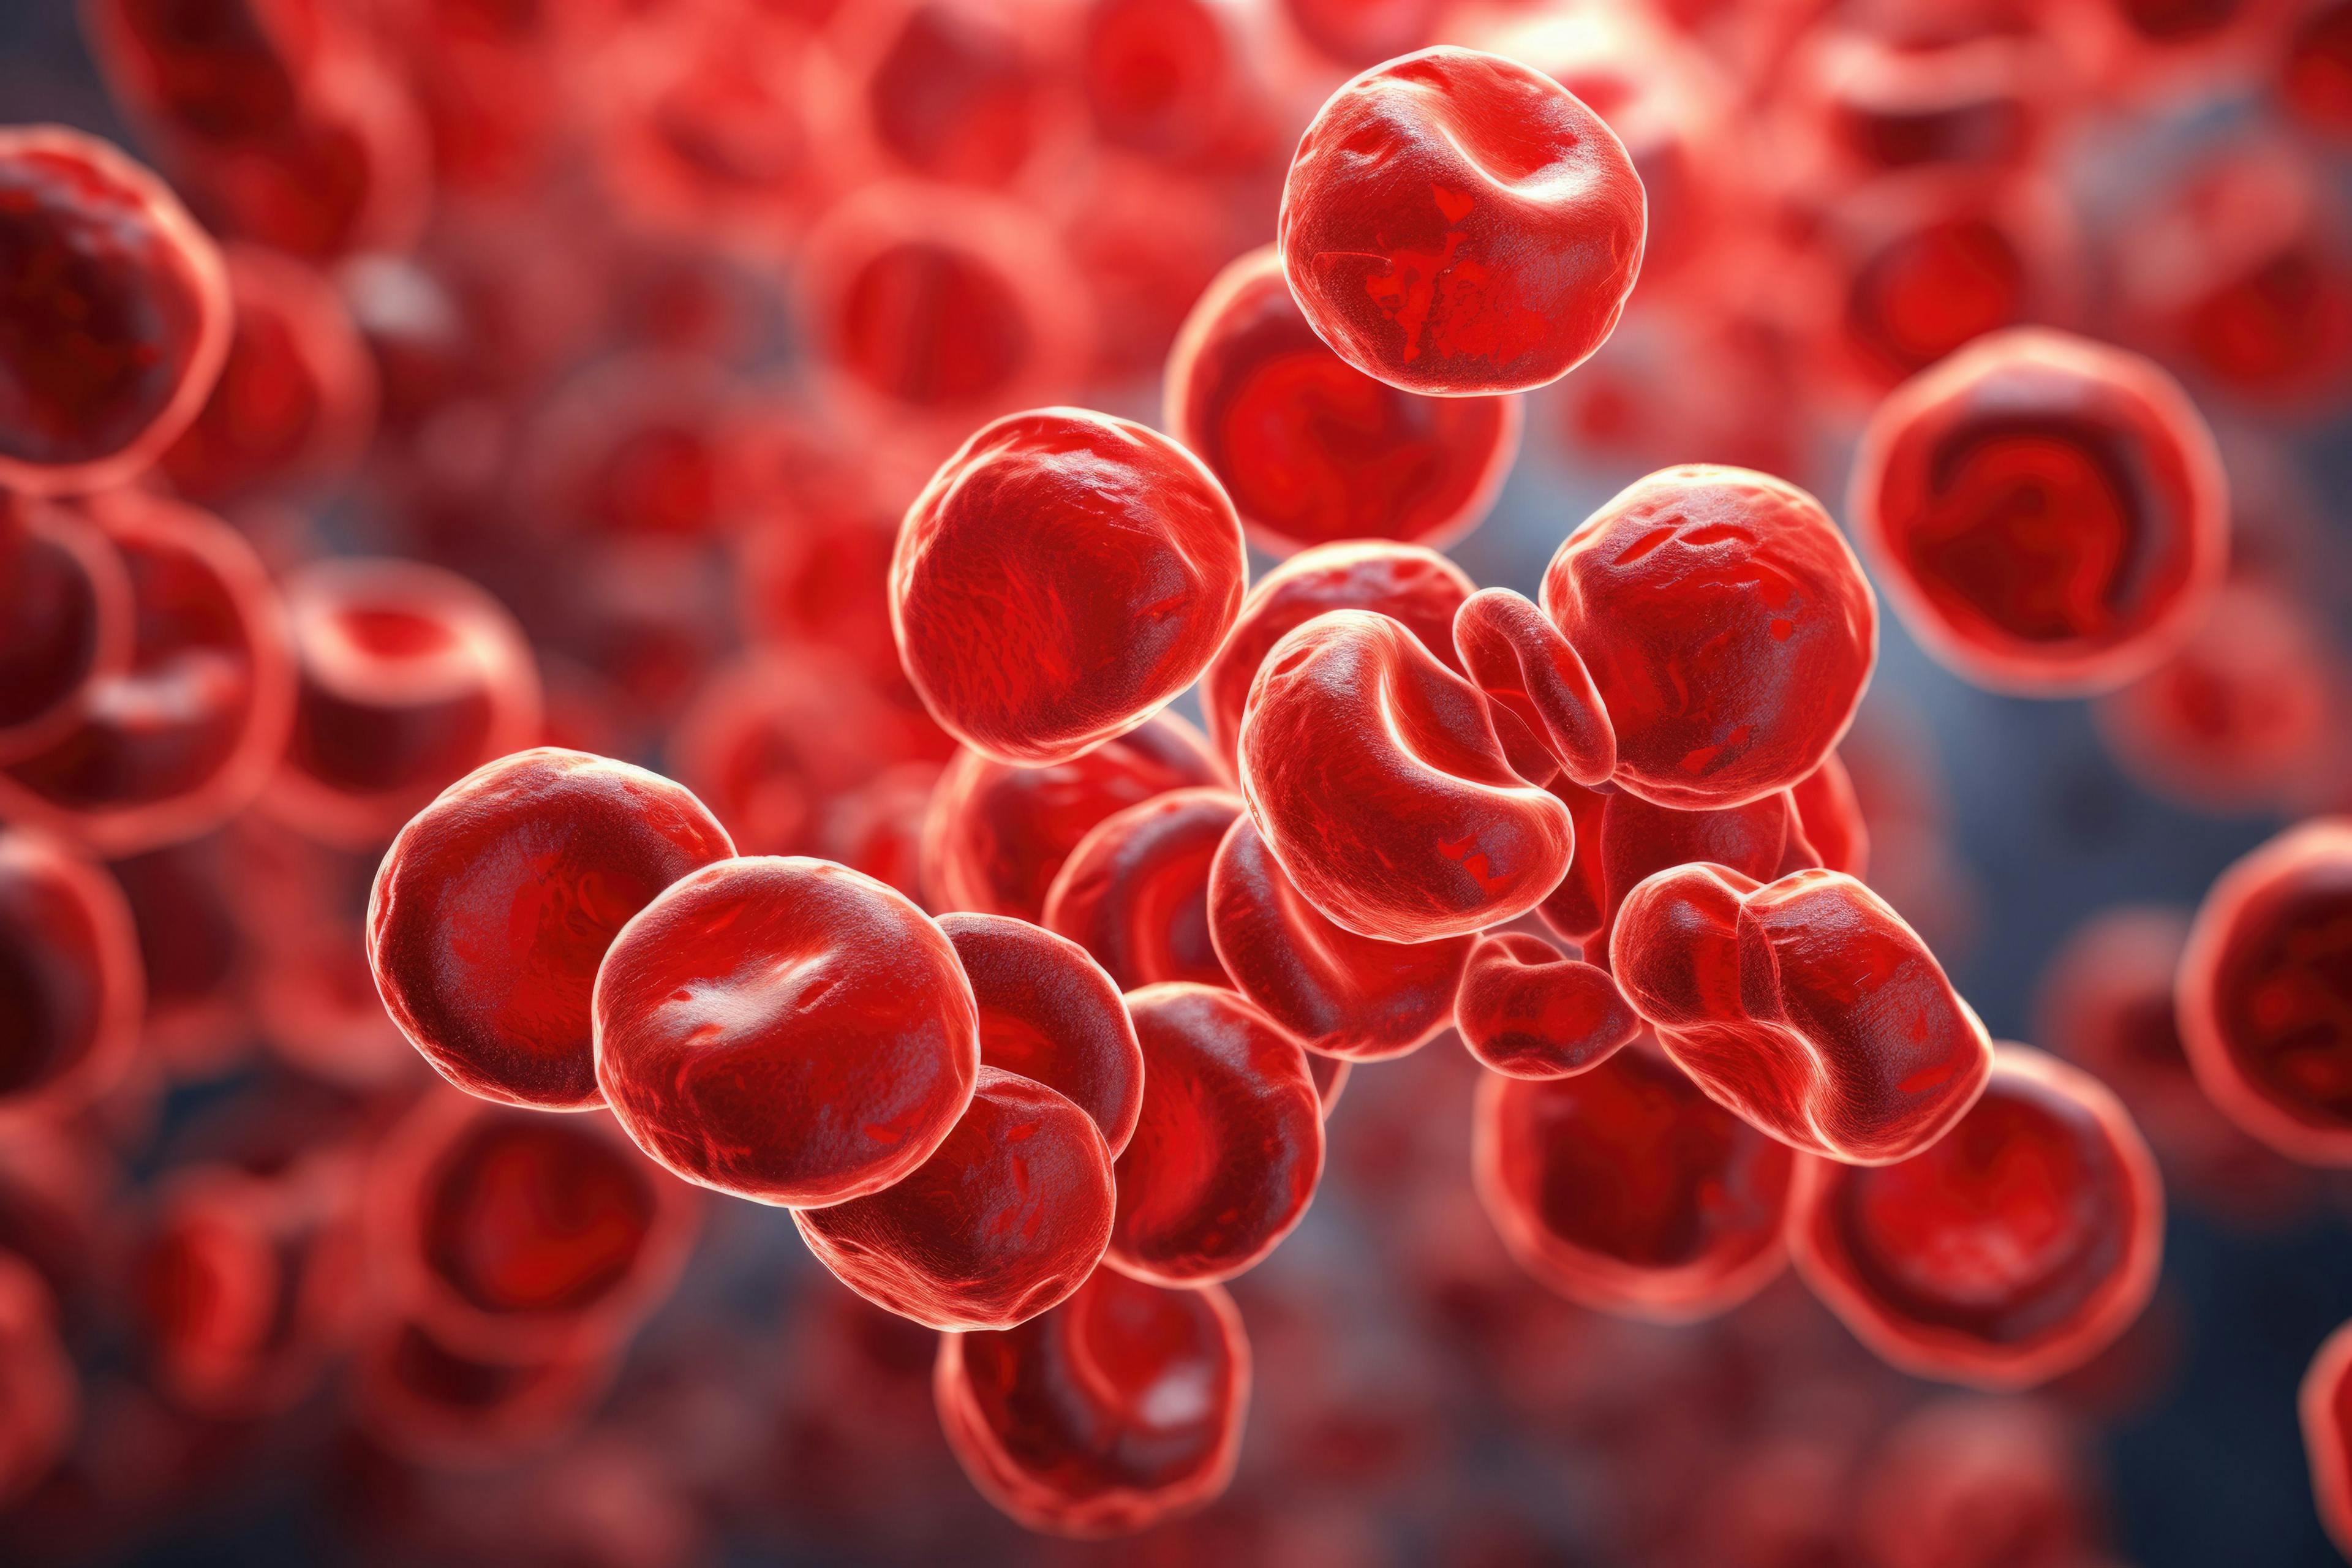 Close up of blood cancer cells under the microscope: © stock_acc - stock.adobe.com